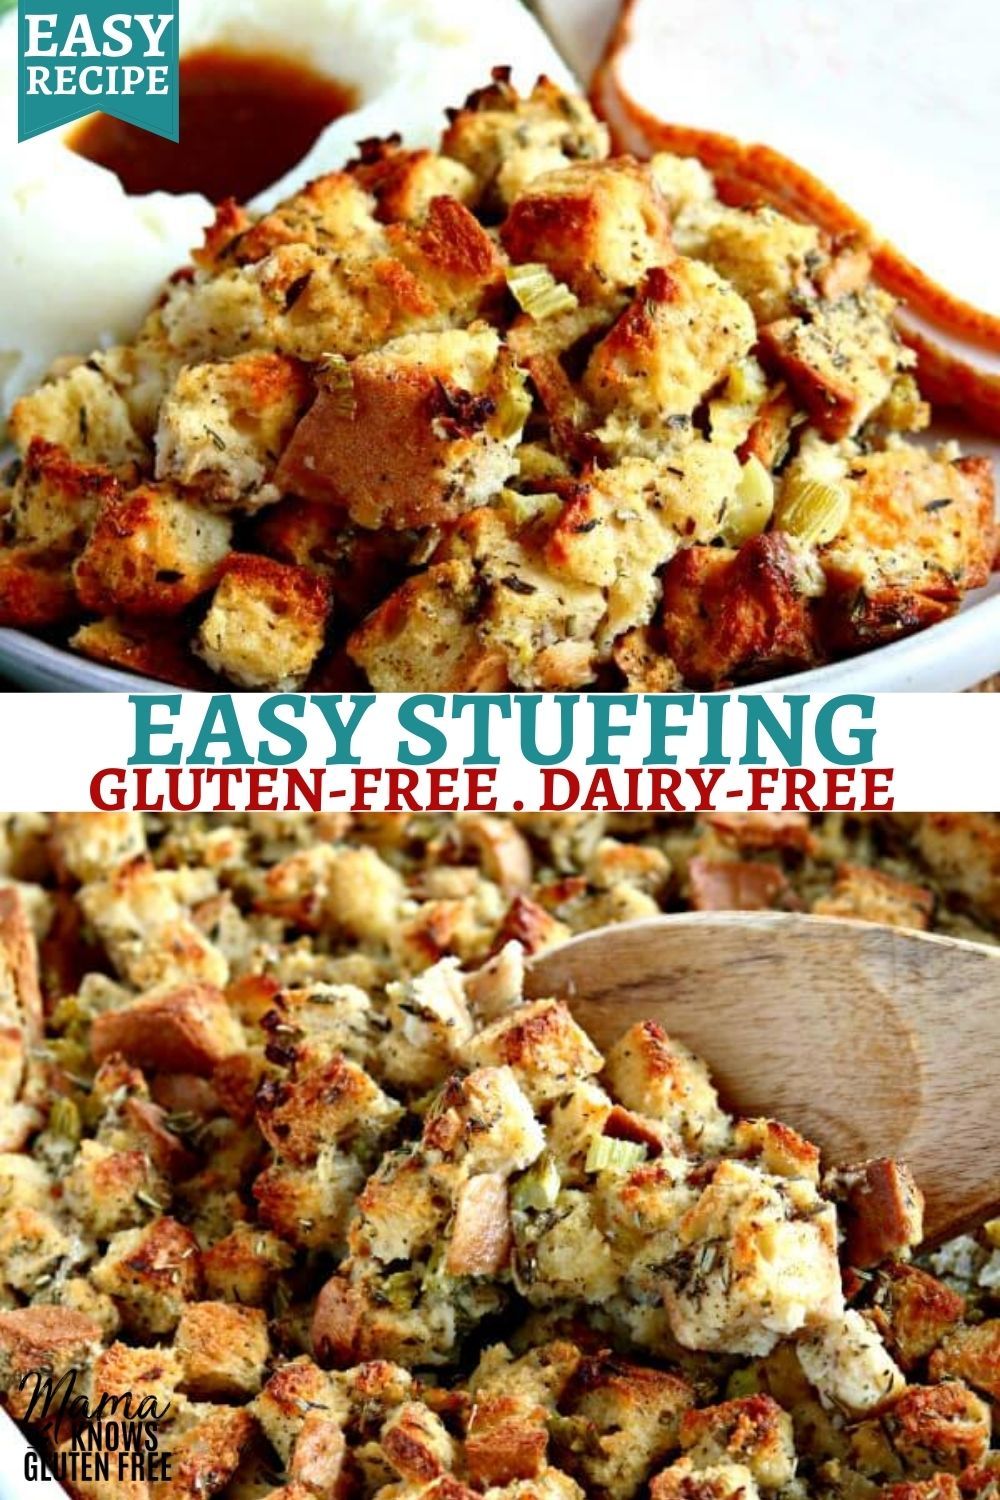 18 stuffing recipes easy thanksgiving ideas